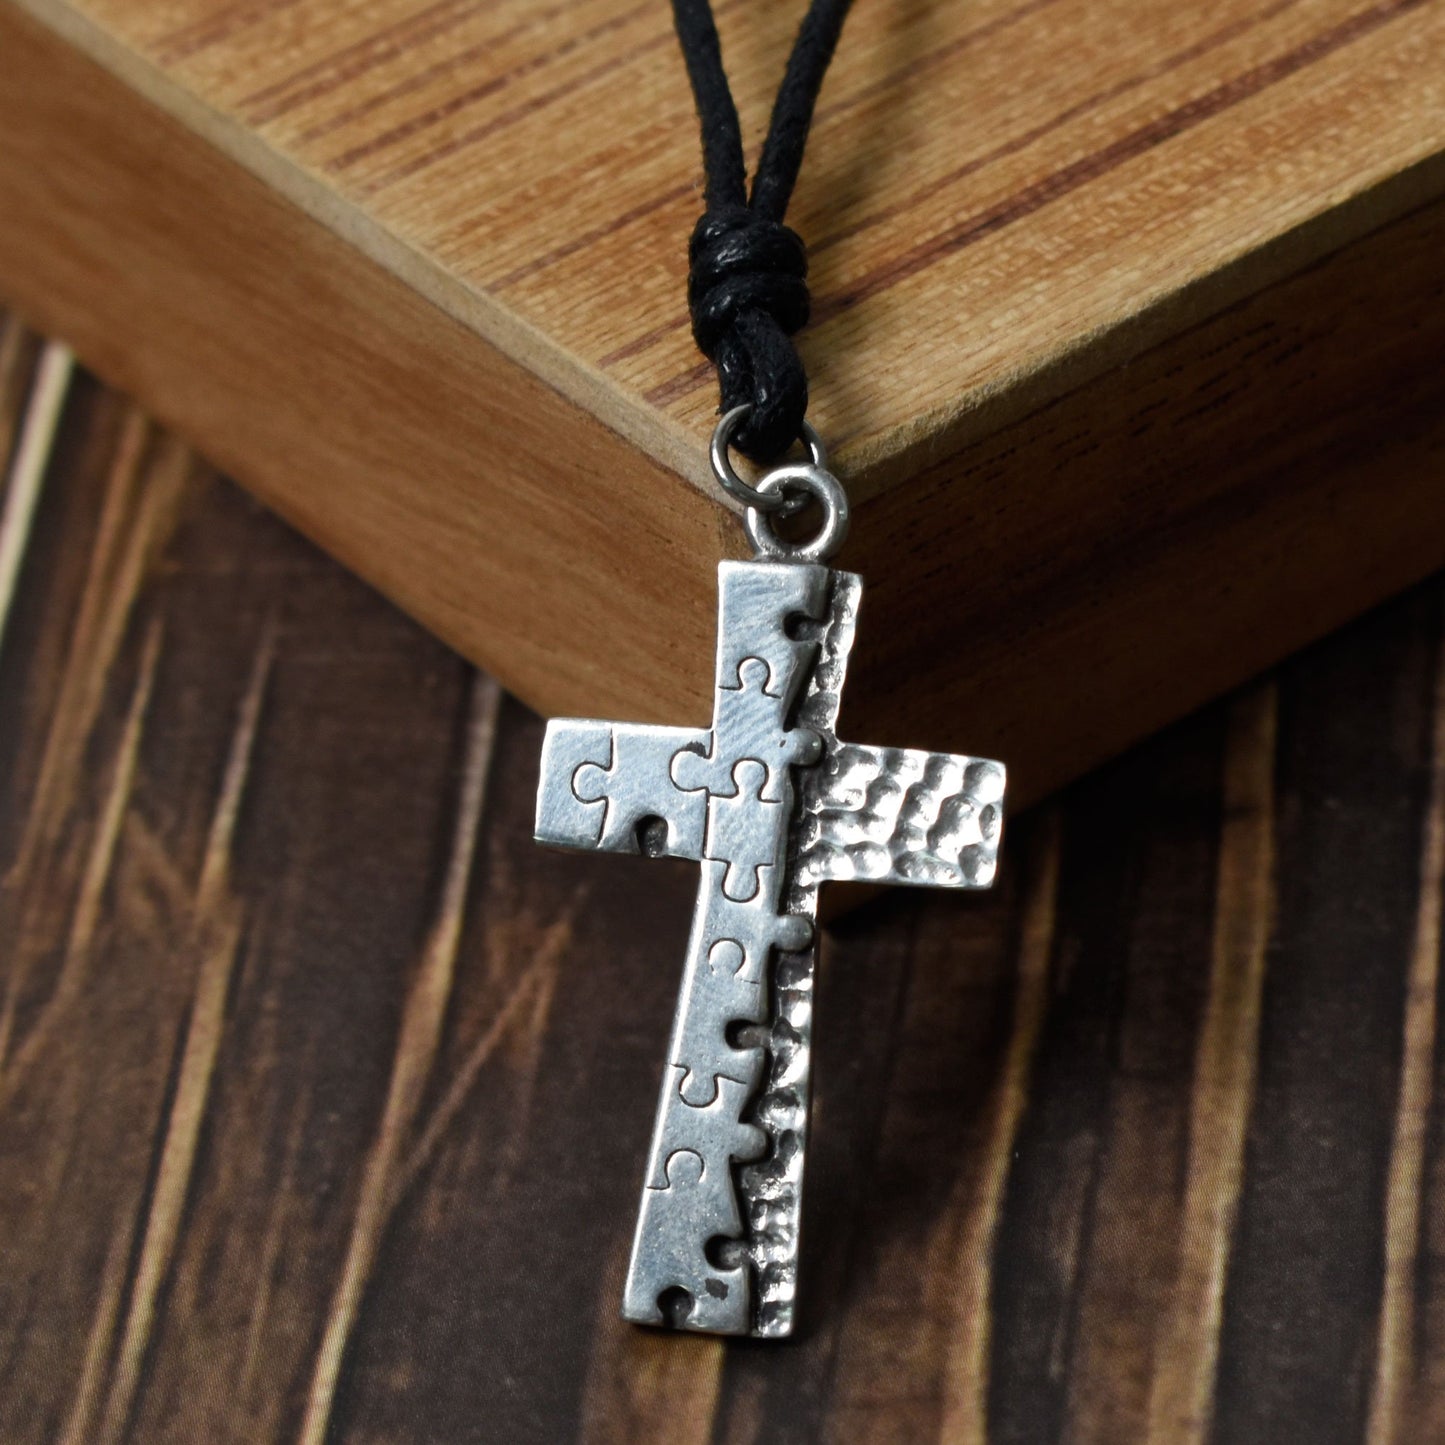 The Christian Cross Silver Pewter Charm Necklace Pendant Jewelry